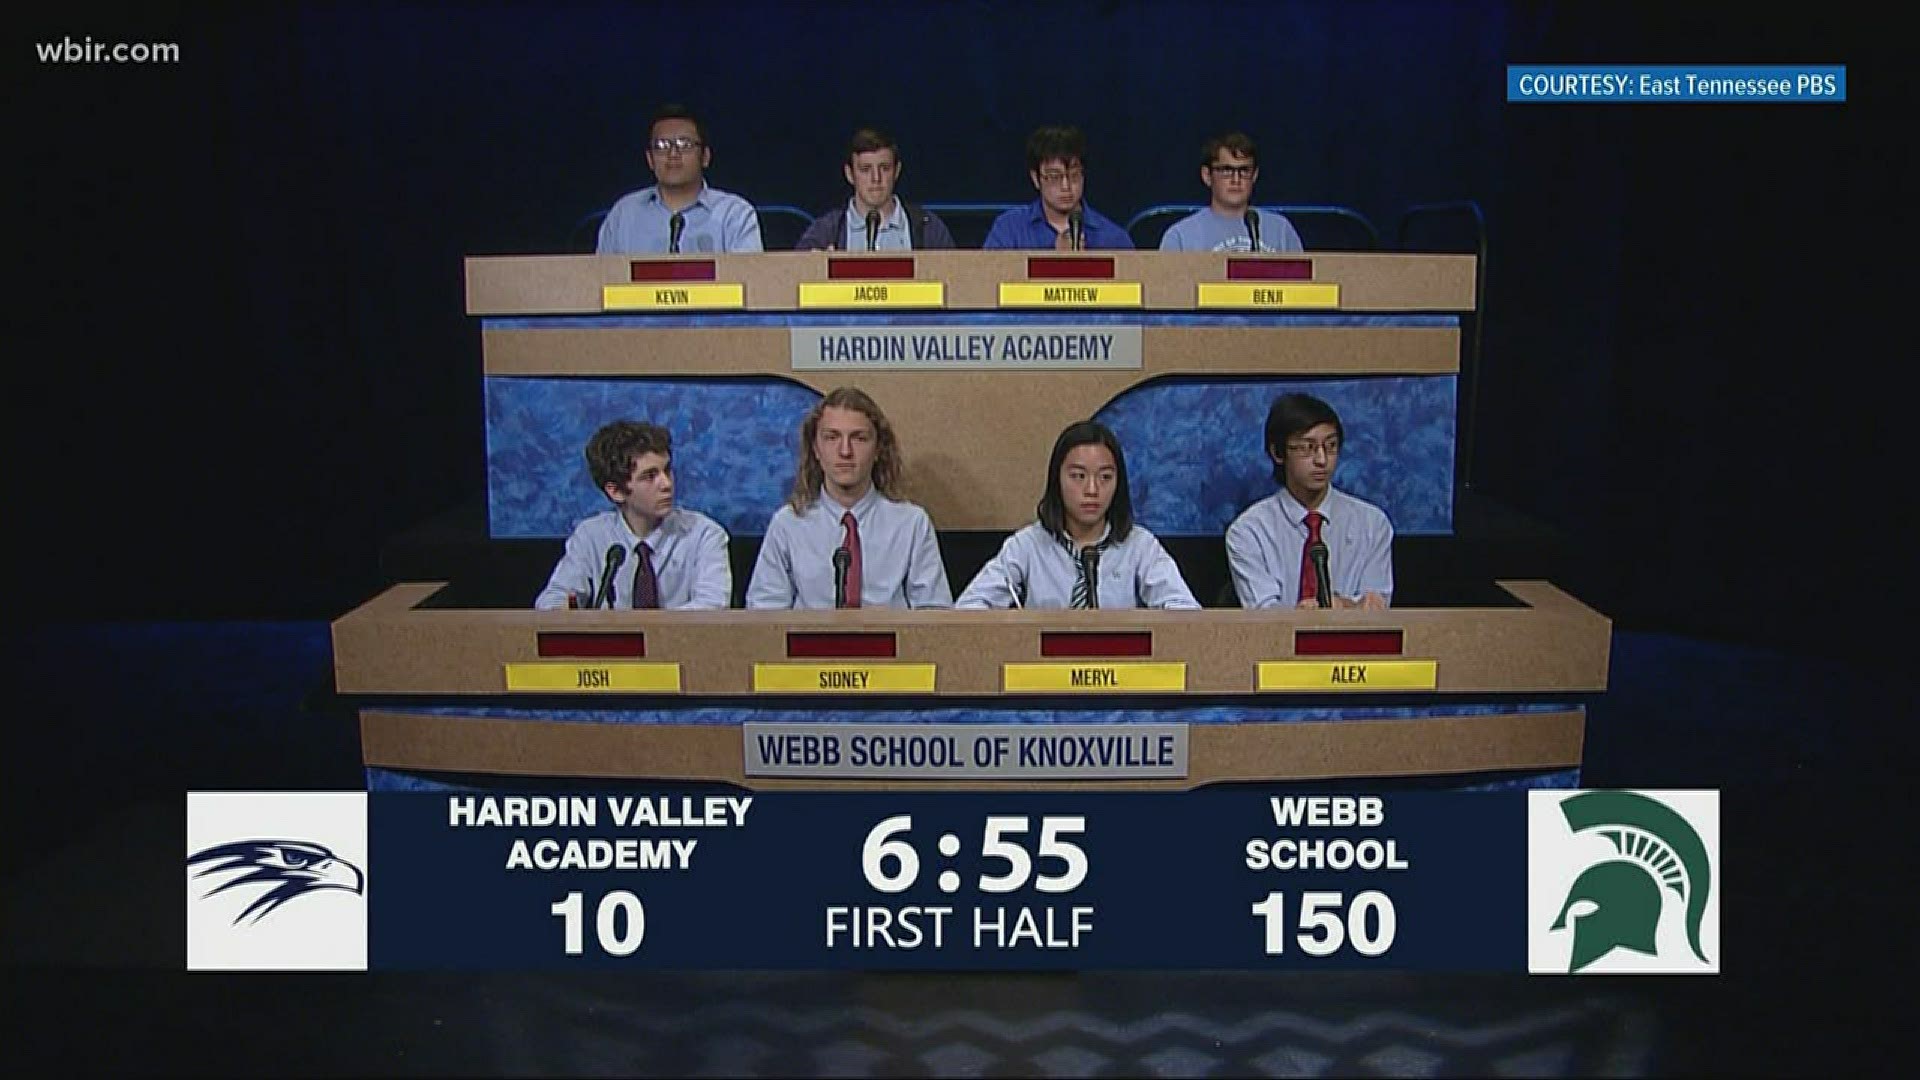 Looking for something new to watch? Next week you can see the first round of the East Tennessee PBS Scholars' Bowl. May 26, 2020-4pm.